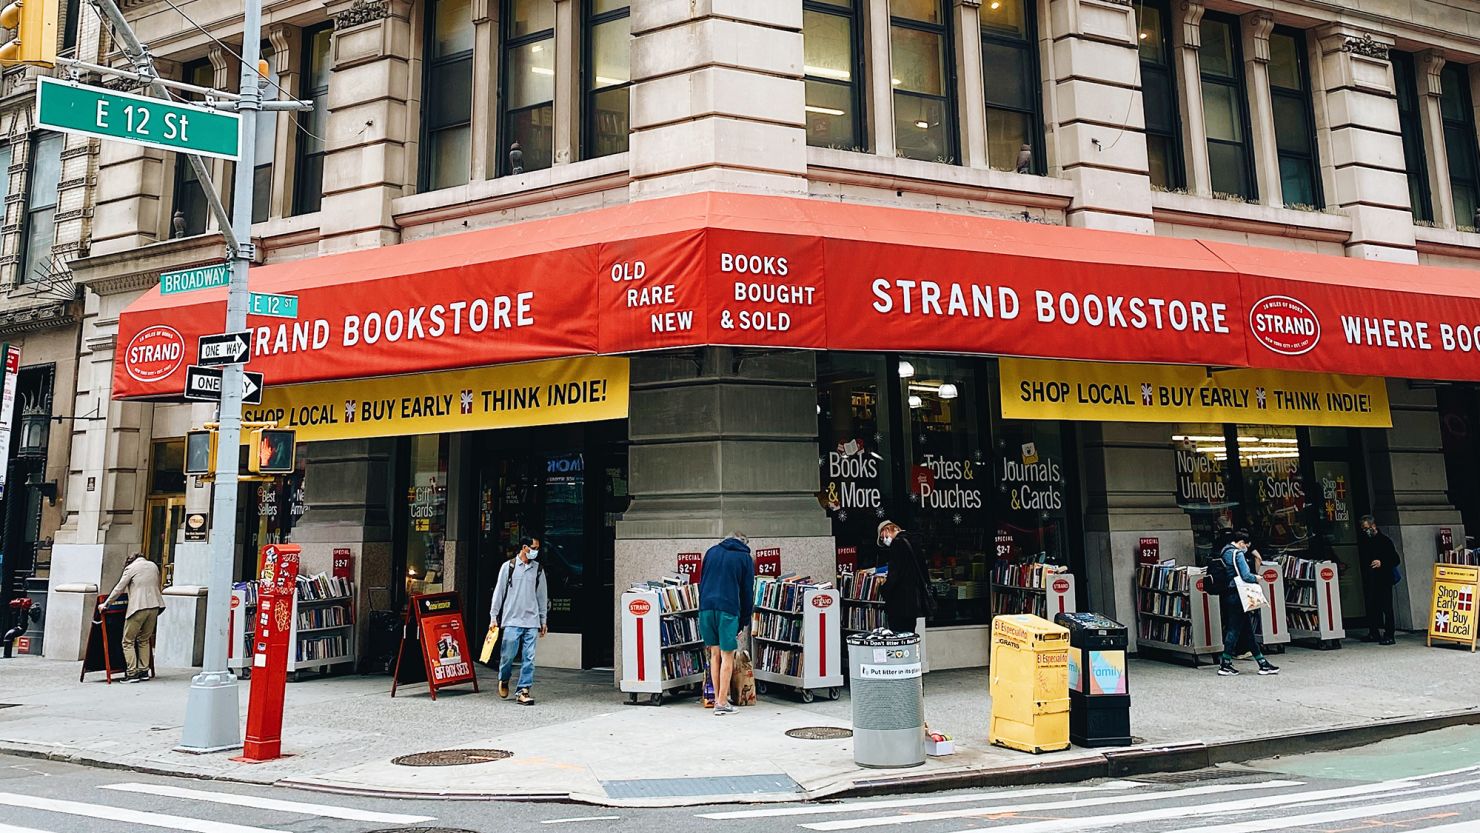 The Strand bookstore in NYC.